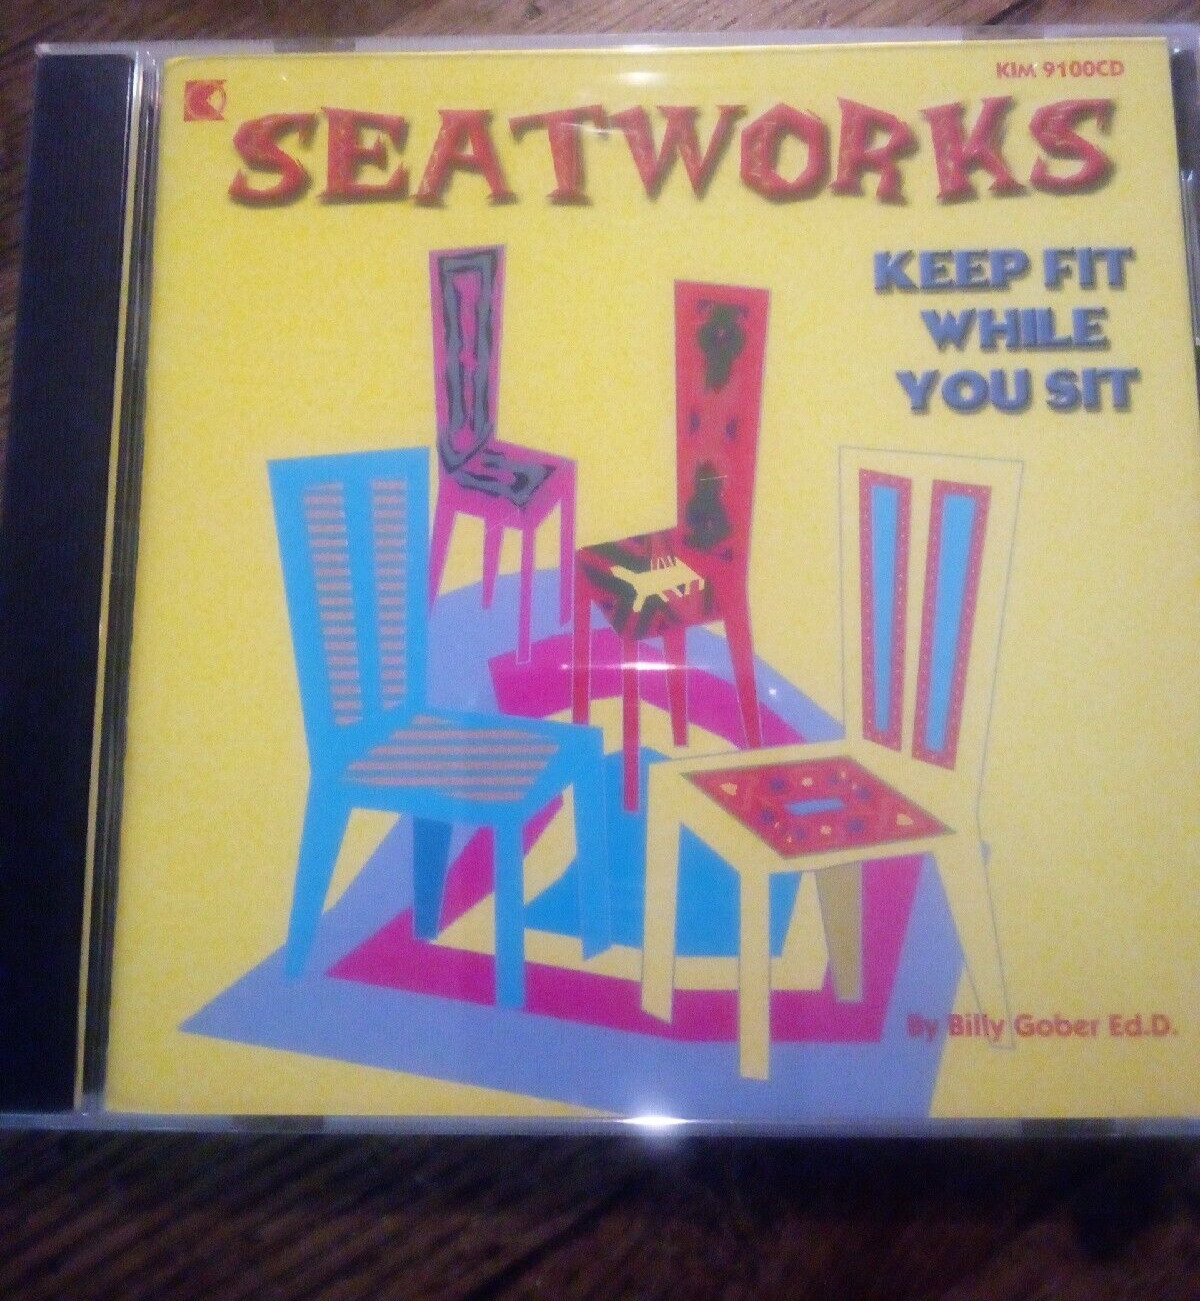 activity music CD KIMBO Seatworks Keep fit while you sit, dance in your seats